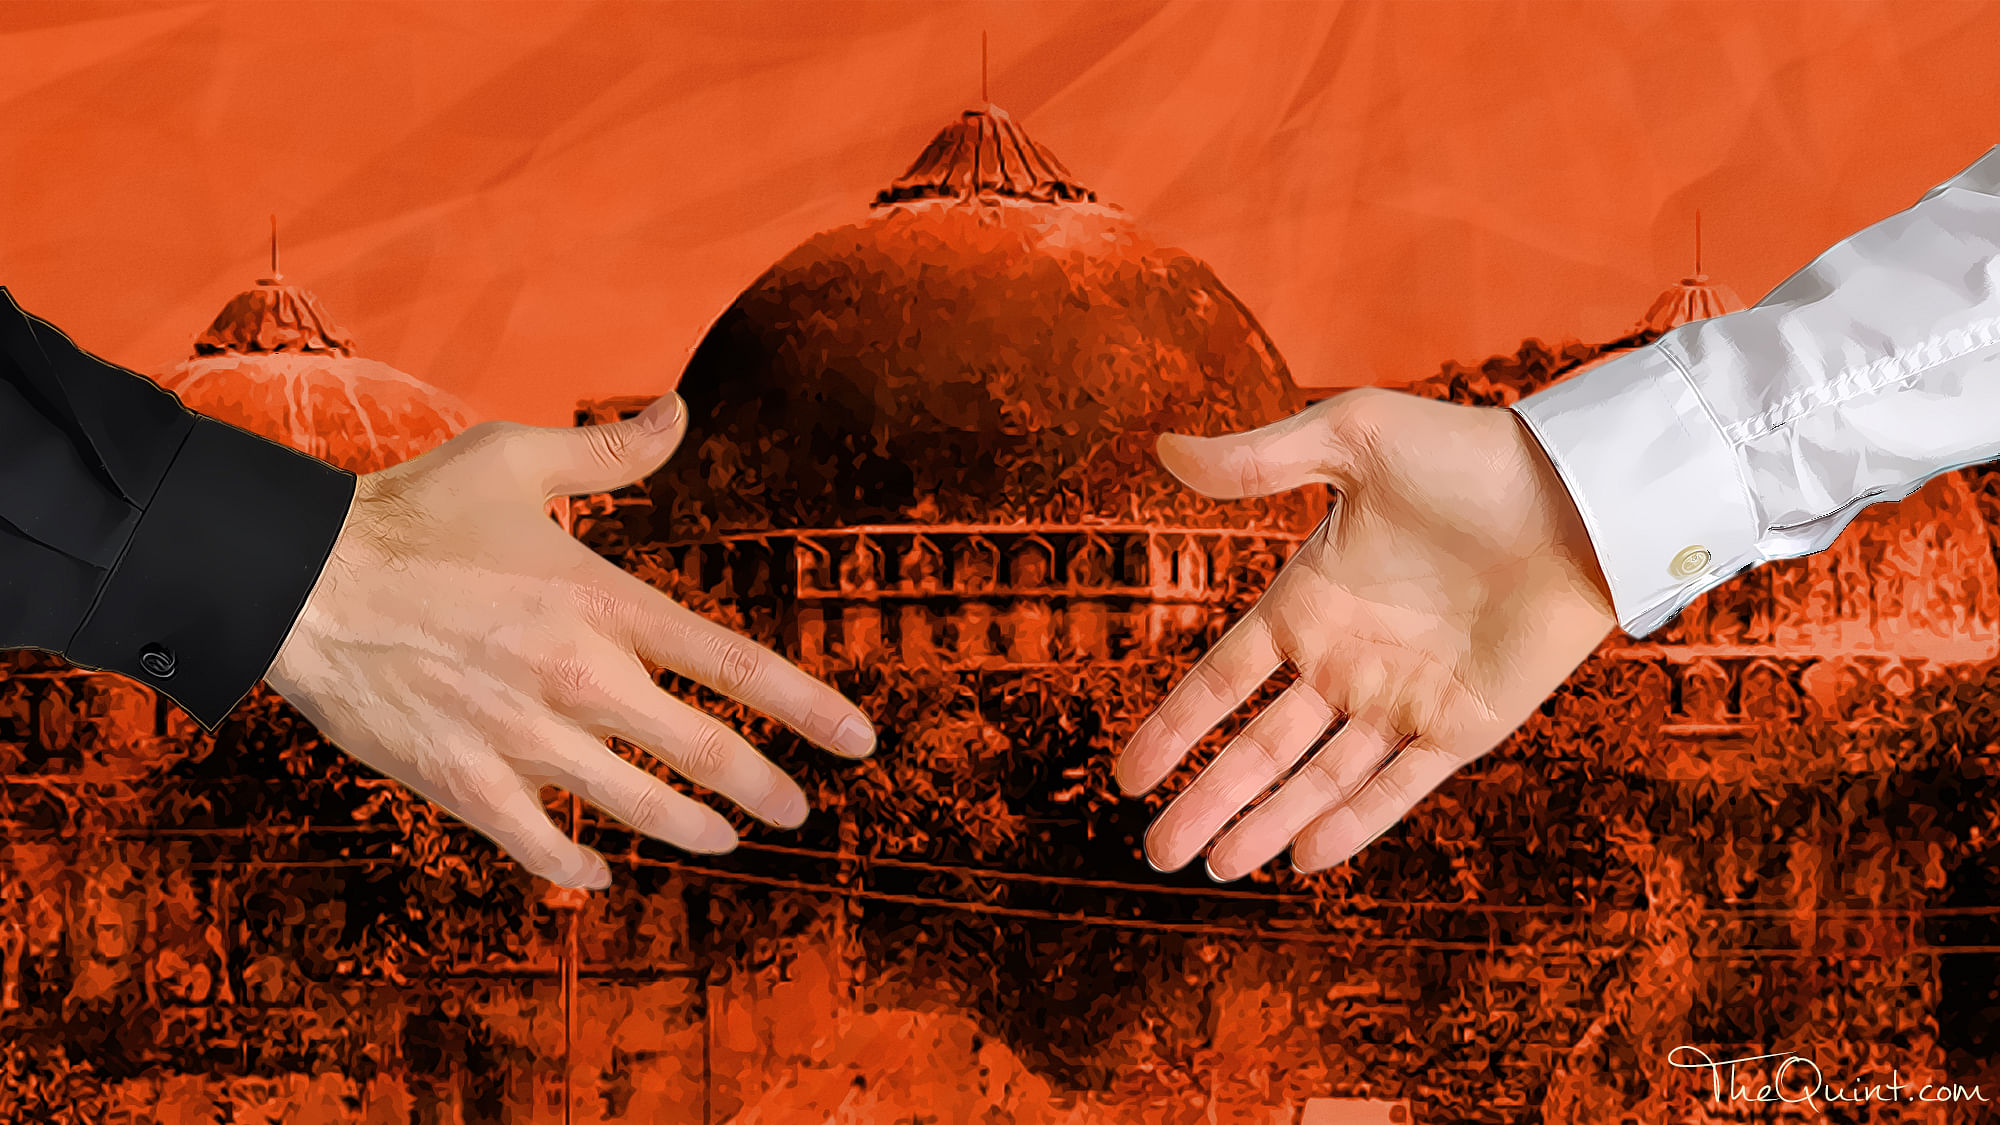 Dialogue on the Ayodhya dispute has so far failed to create a consensus as an unresolved conflict has more political dividends.